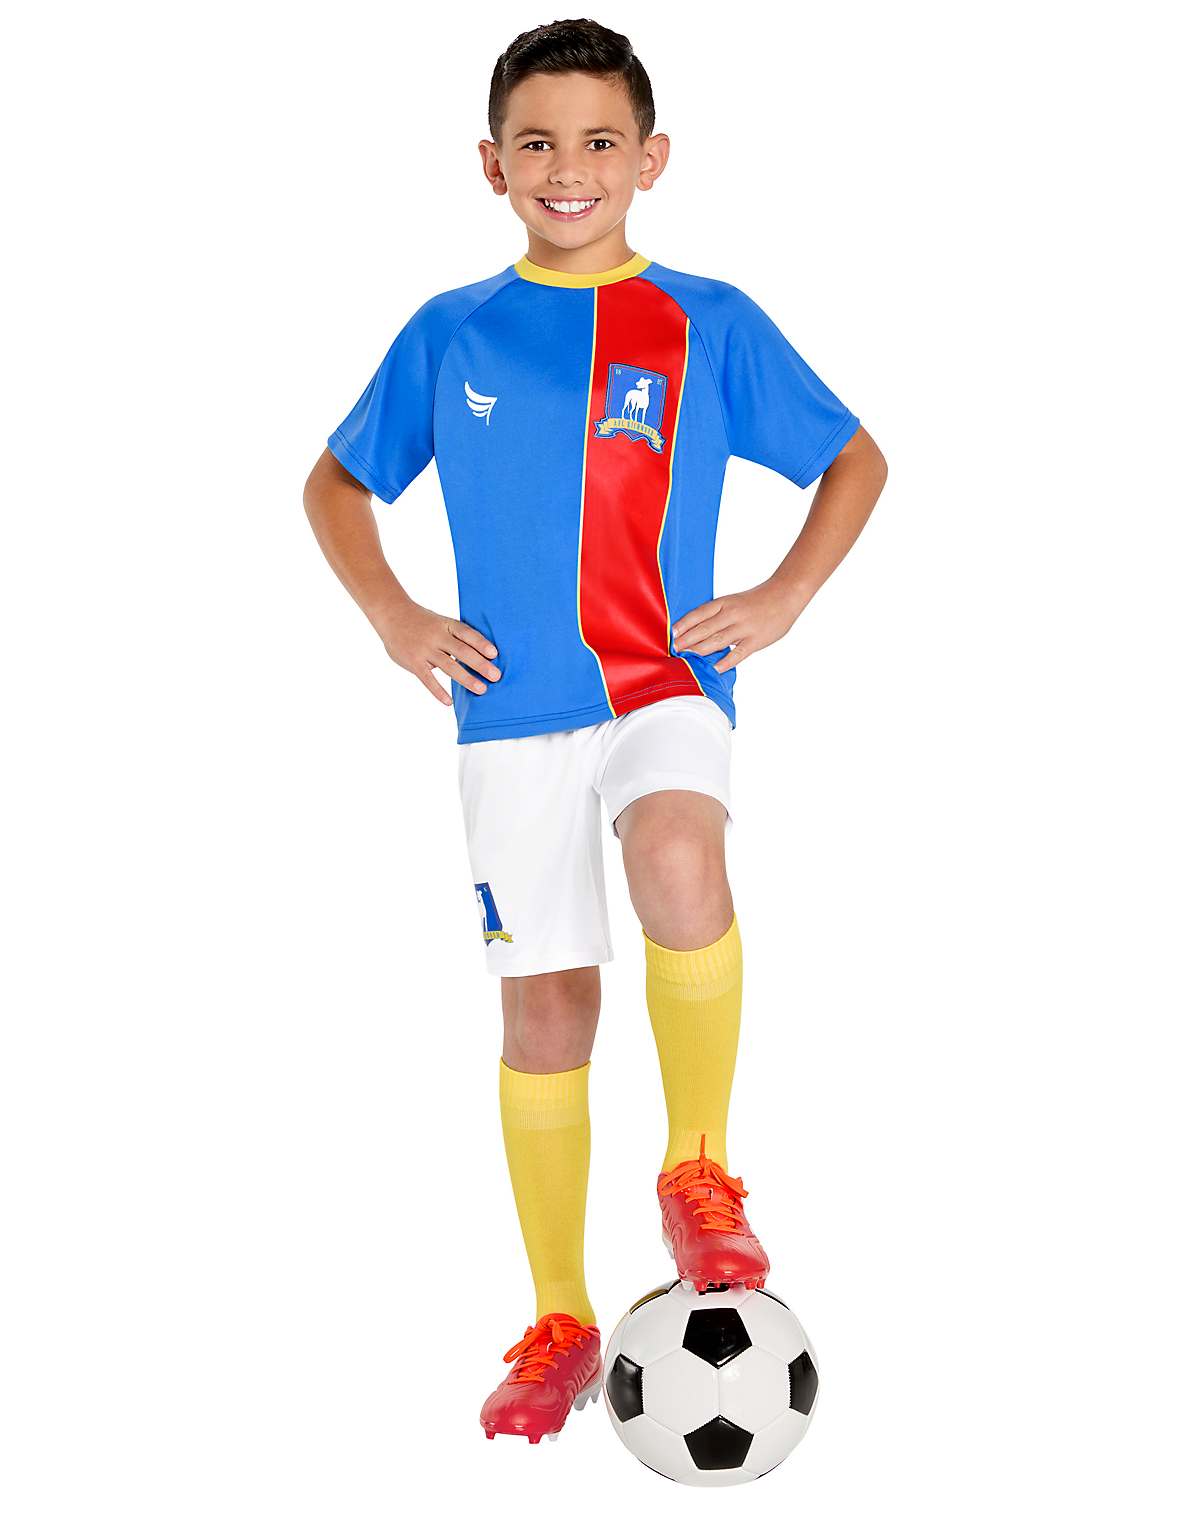 Kids AFC Richmond Soccer Costume - Ted Lasso